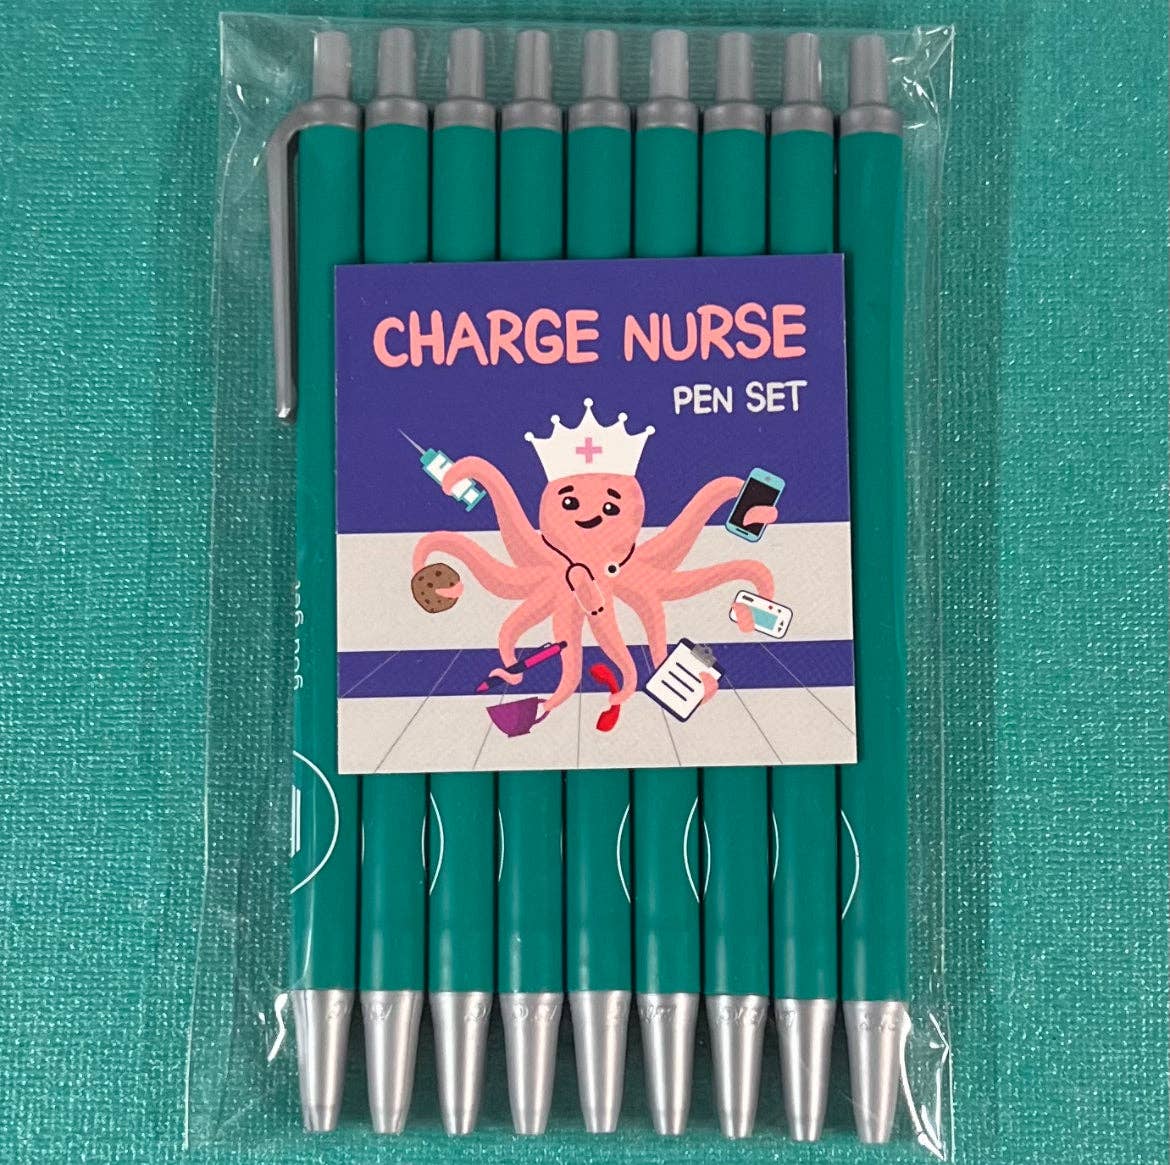 Badge Reel: What the cluck – snarkynurses